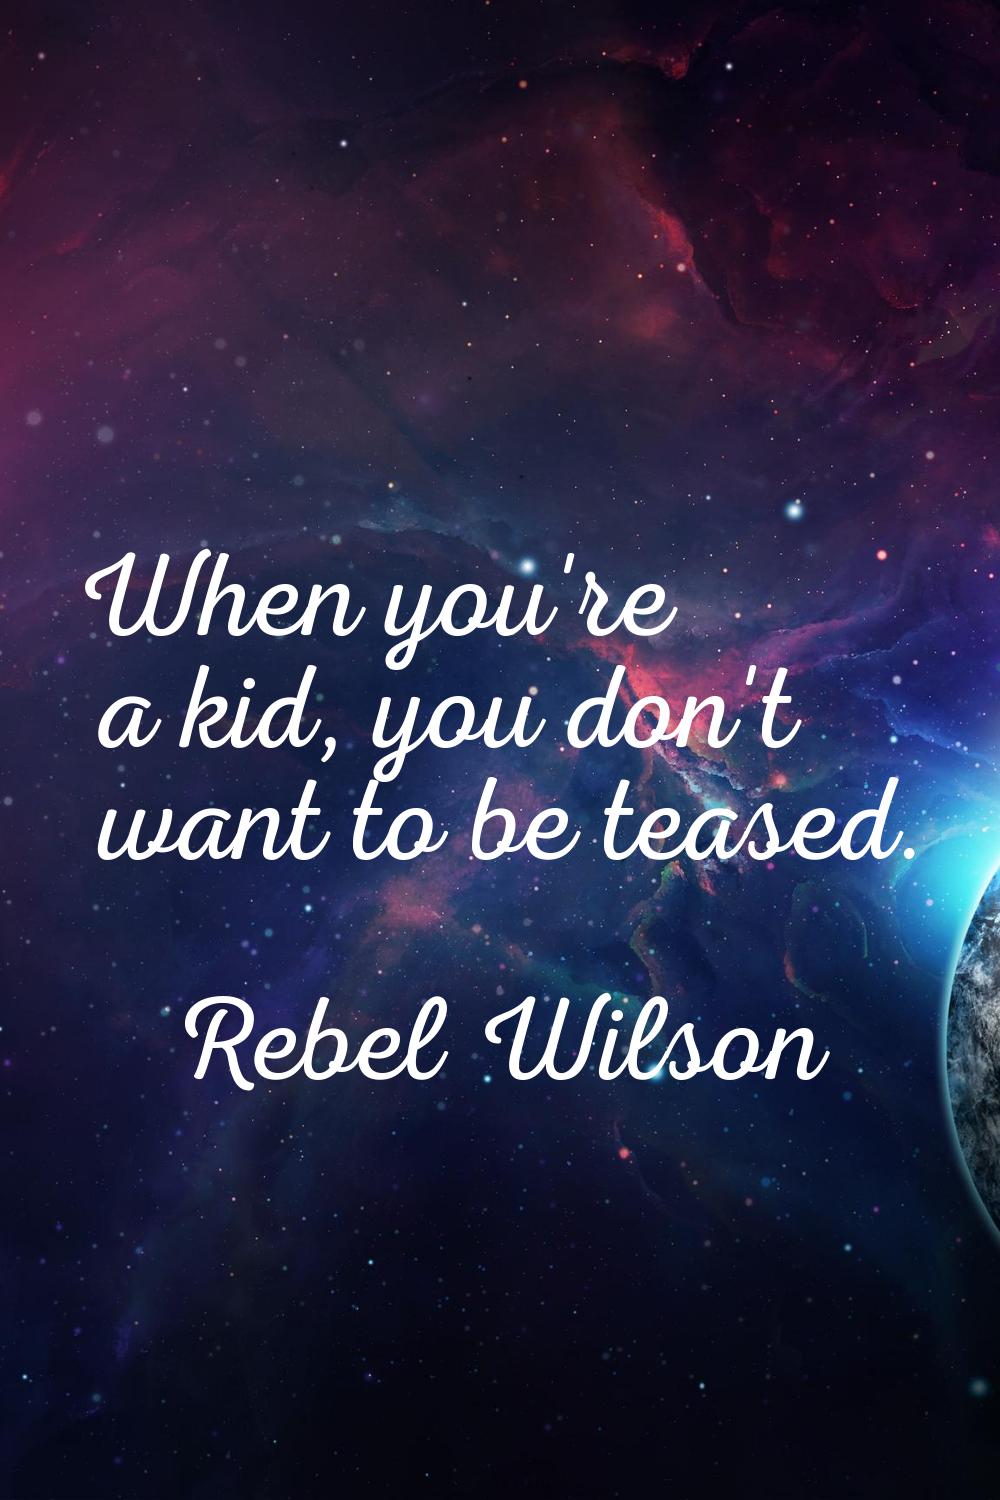 When you're a kid, you don't want to be teased.